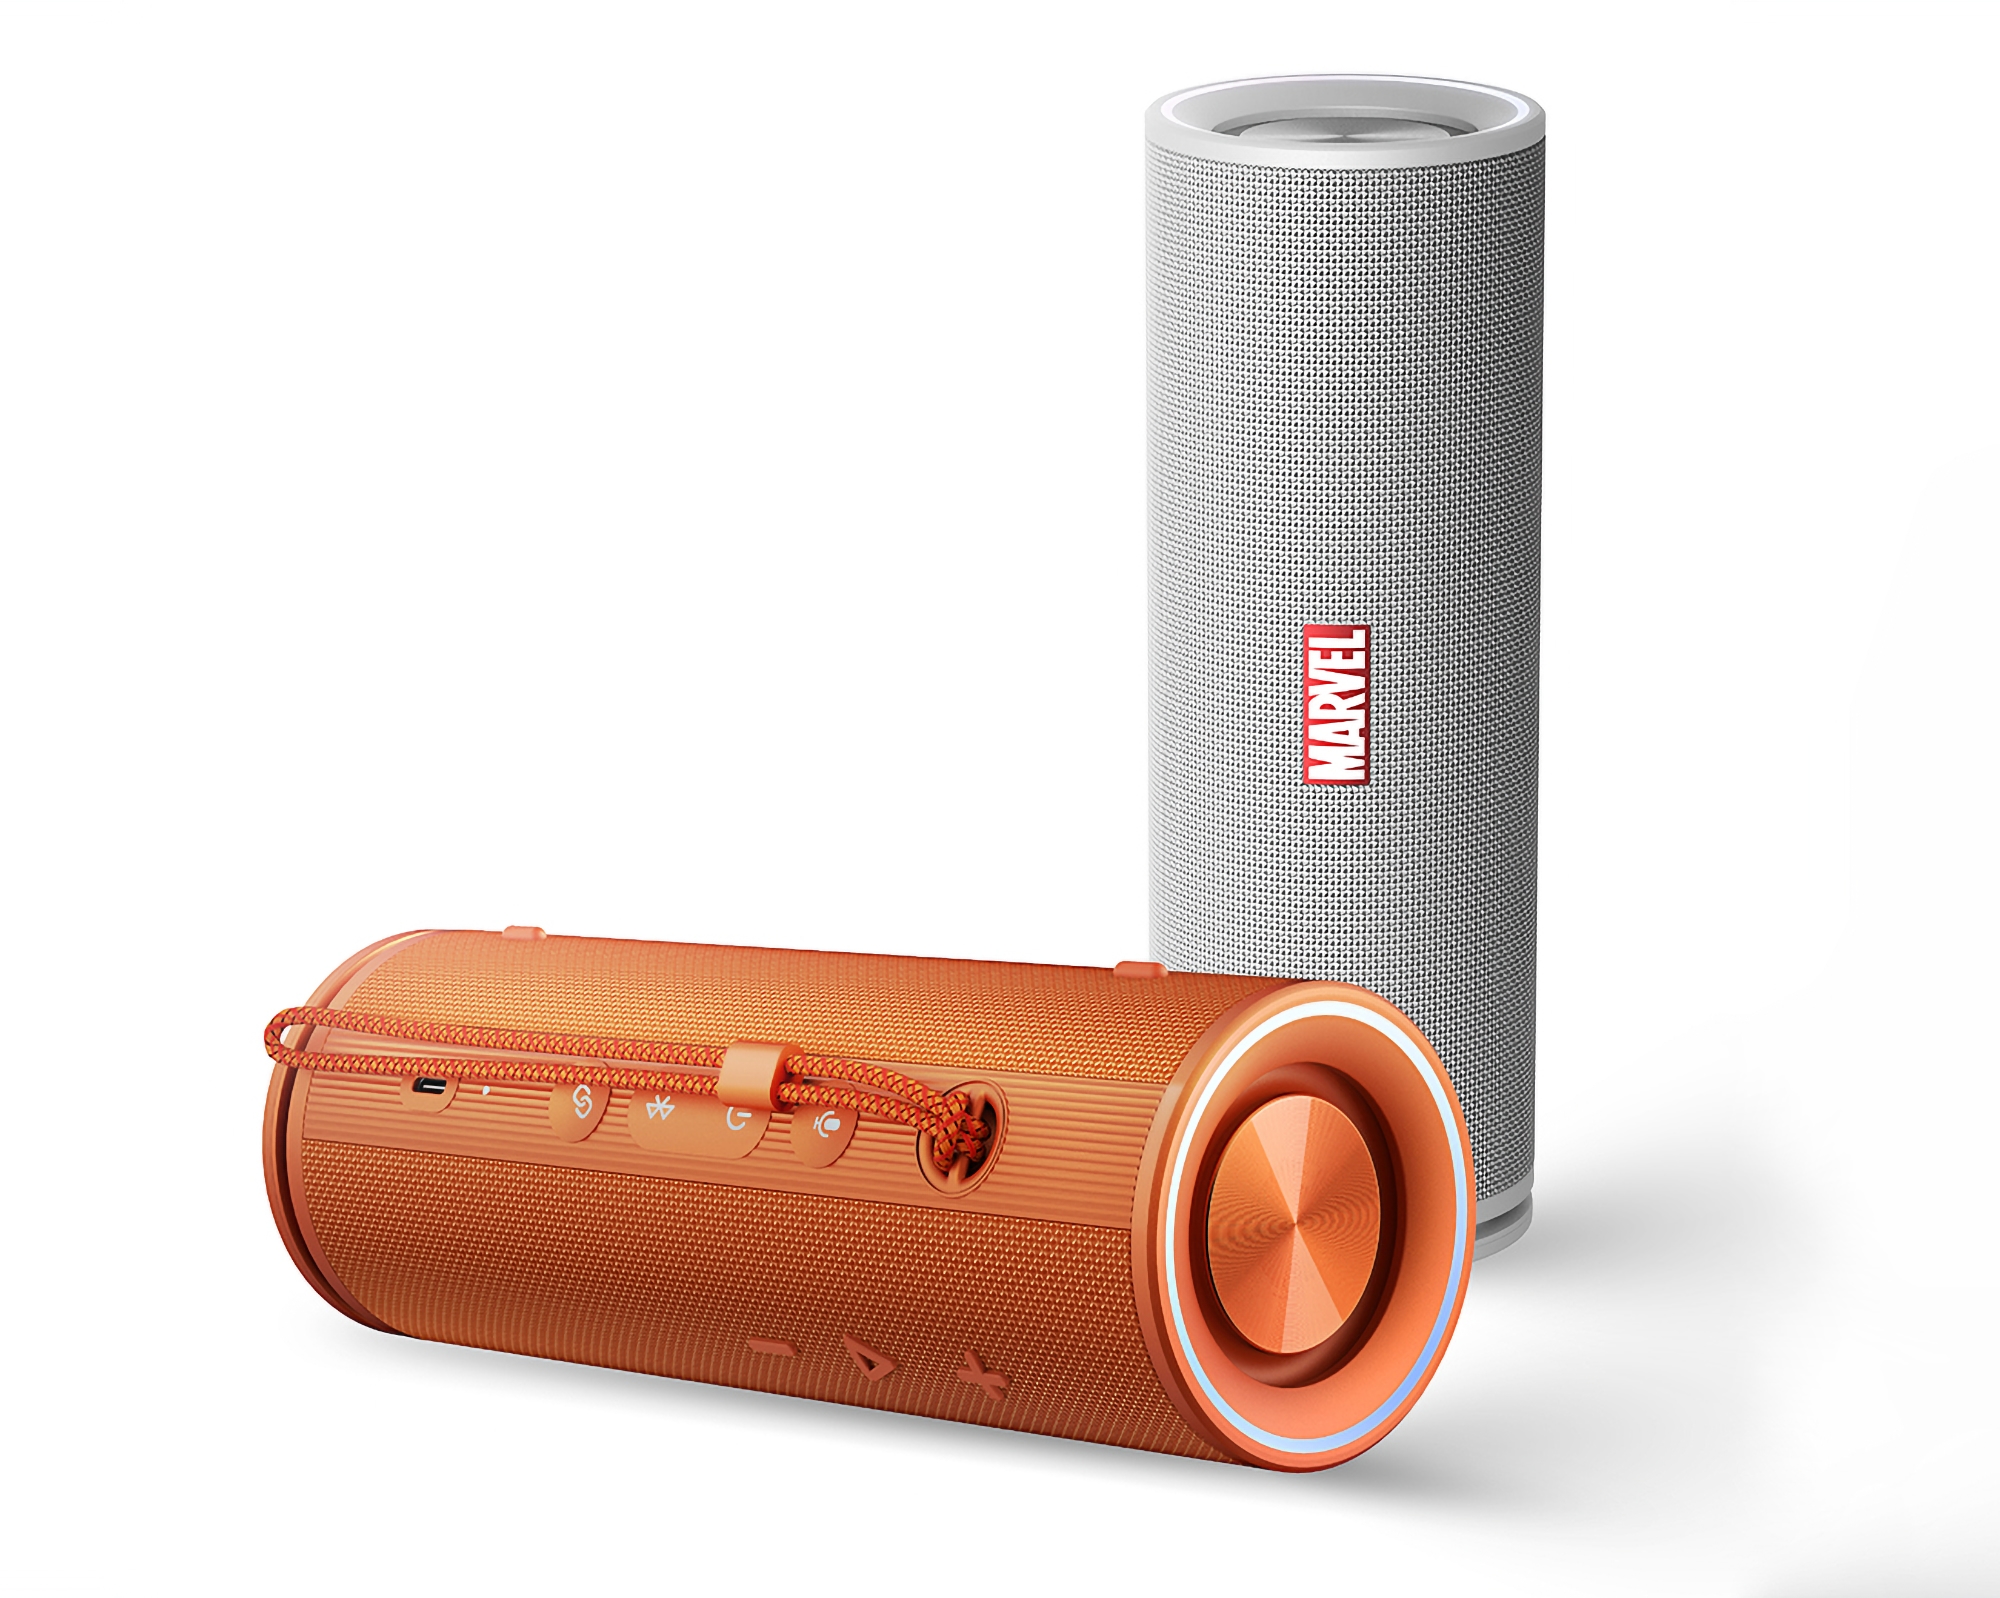 Honor and Marvel announced Portable Bluetooth Speaker Pro with 30 watts of power and up to 12 hours of battery life